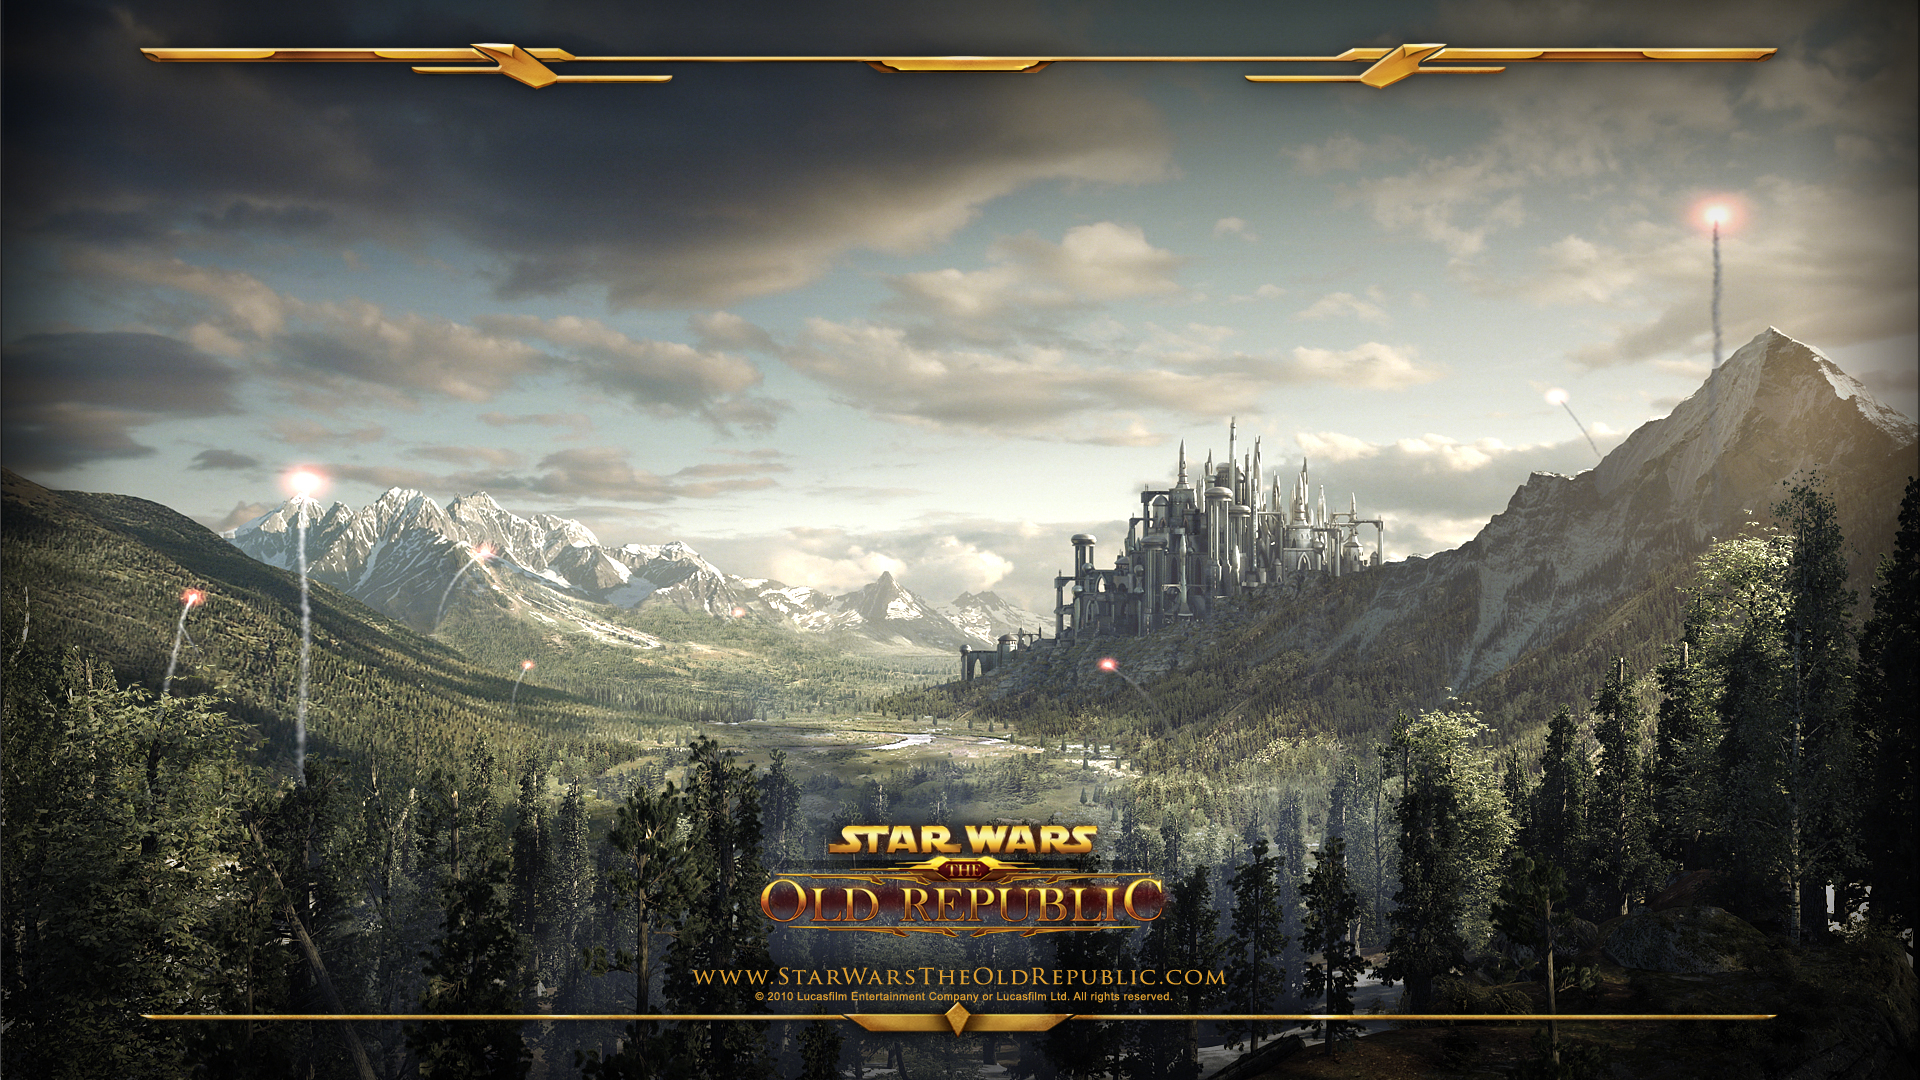 Swtor Wallpapers Star Wars The Old Republig Blog Fansite